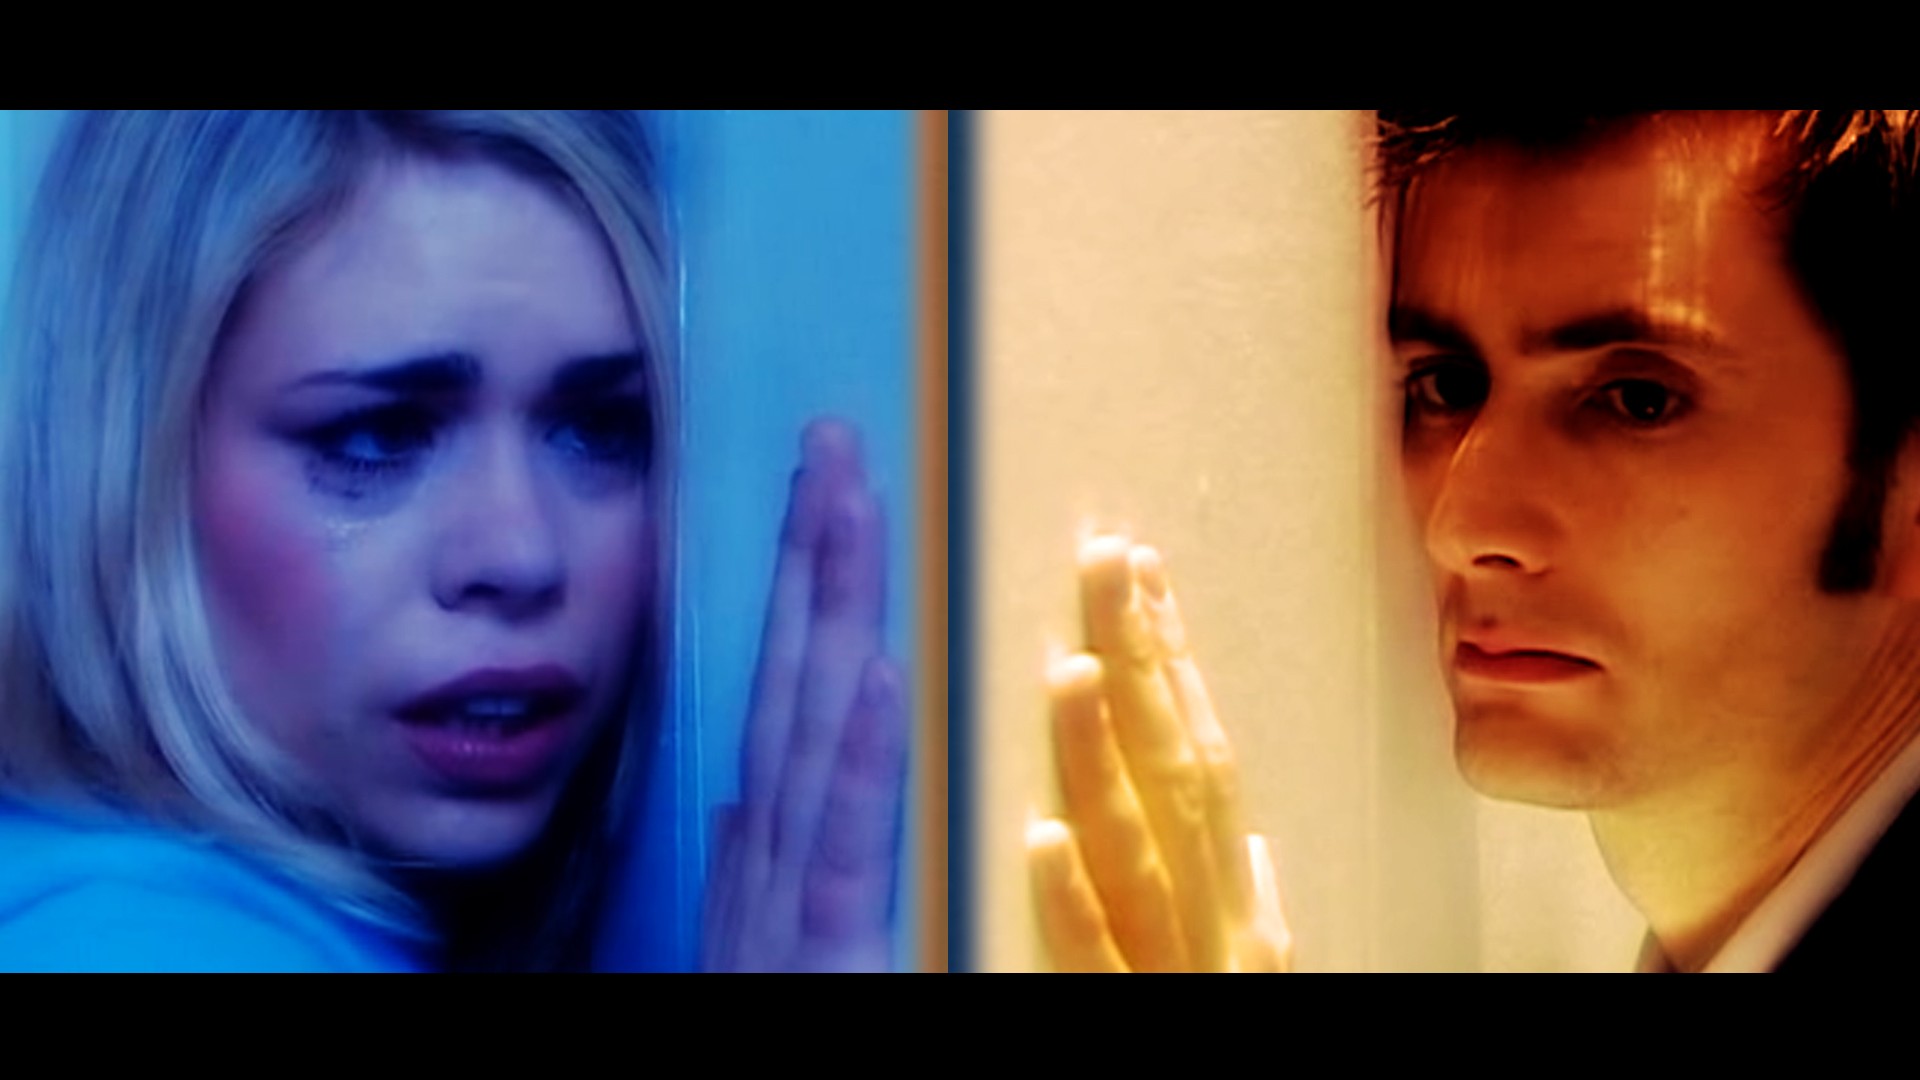 Rose Tyler David Tennant Billie Piper Doctor Who Tenth Doctor